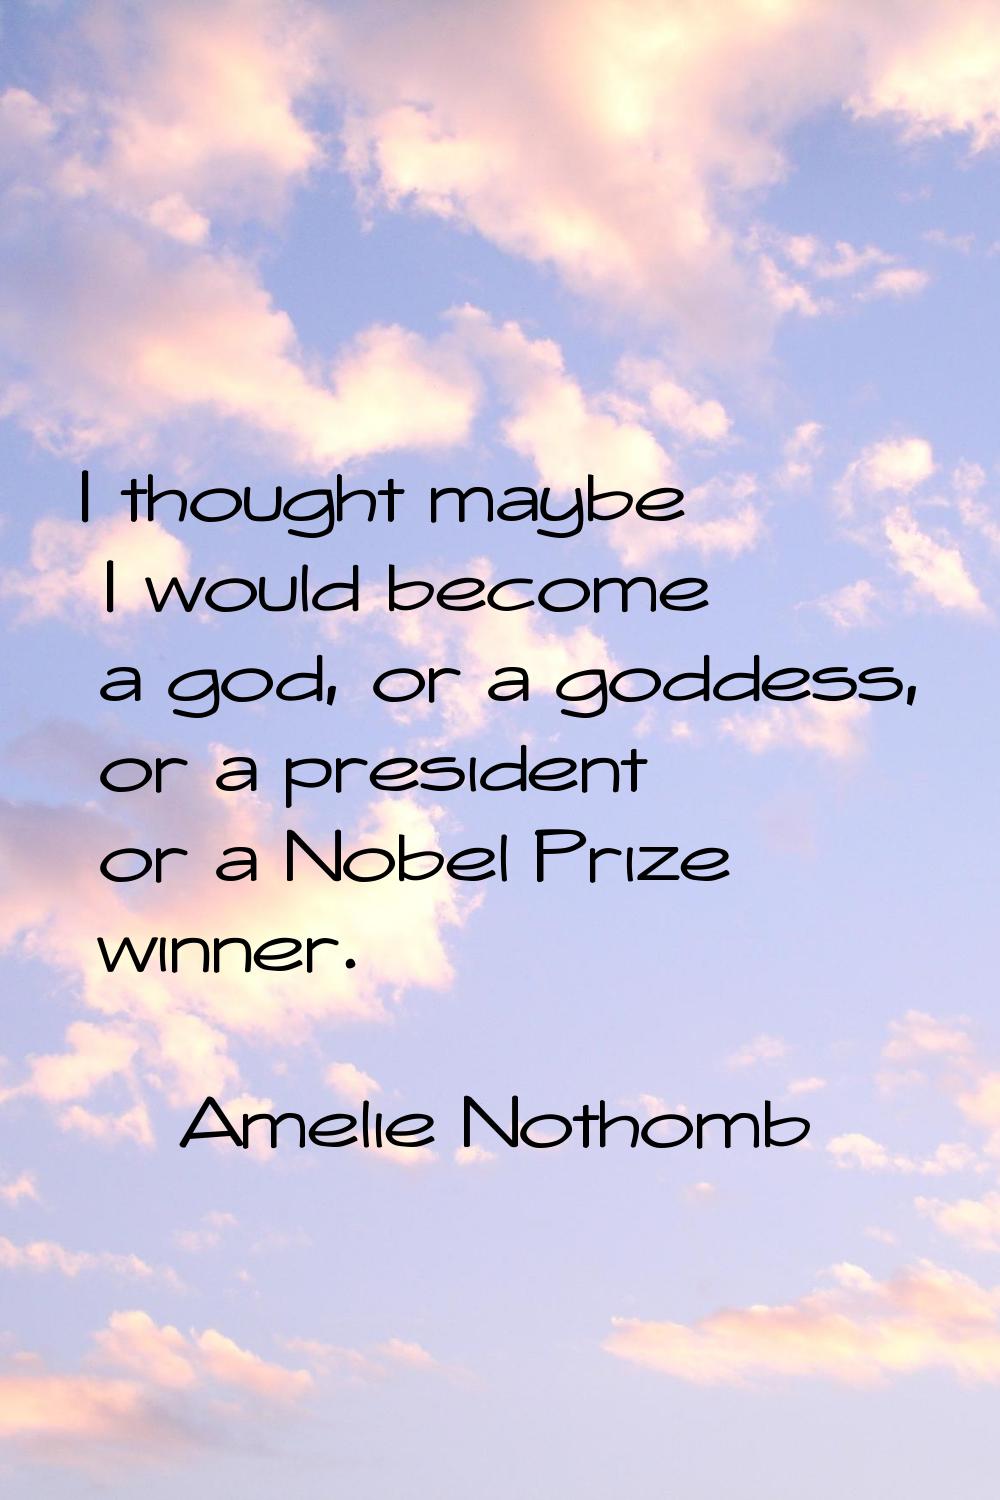 I thought maybe I would become a god, or a goddess, or a president or a Nobel Prize winner.